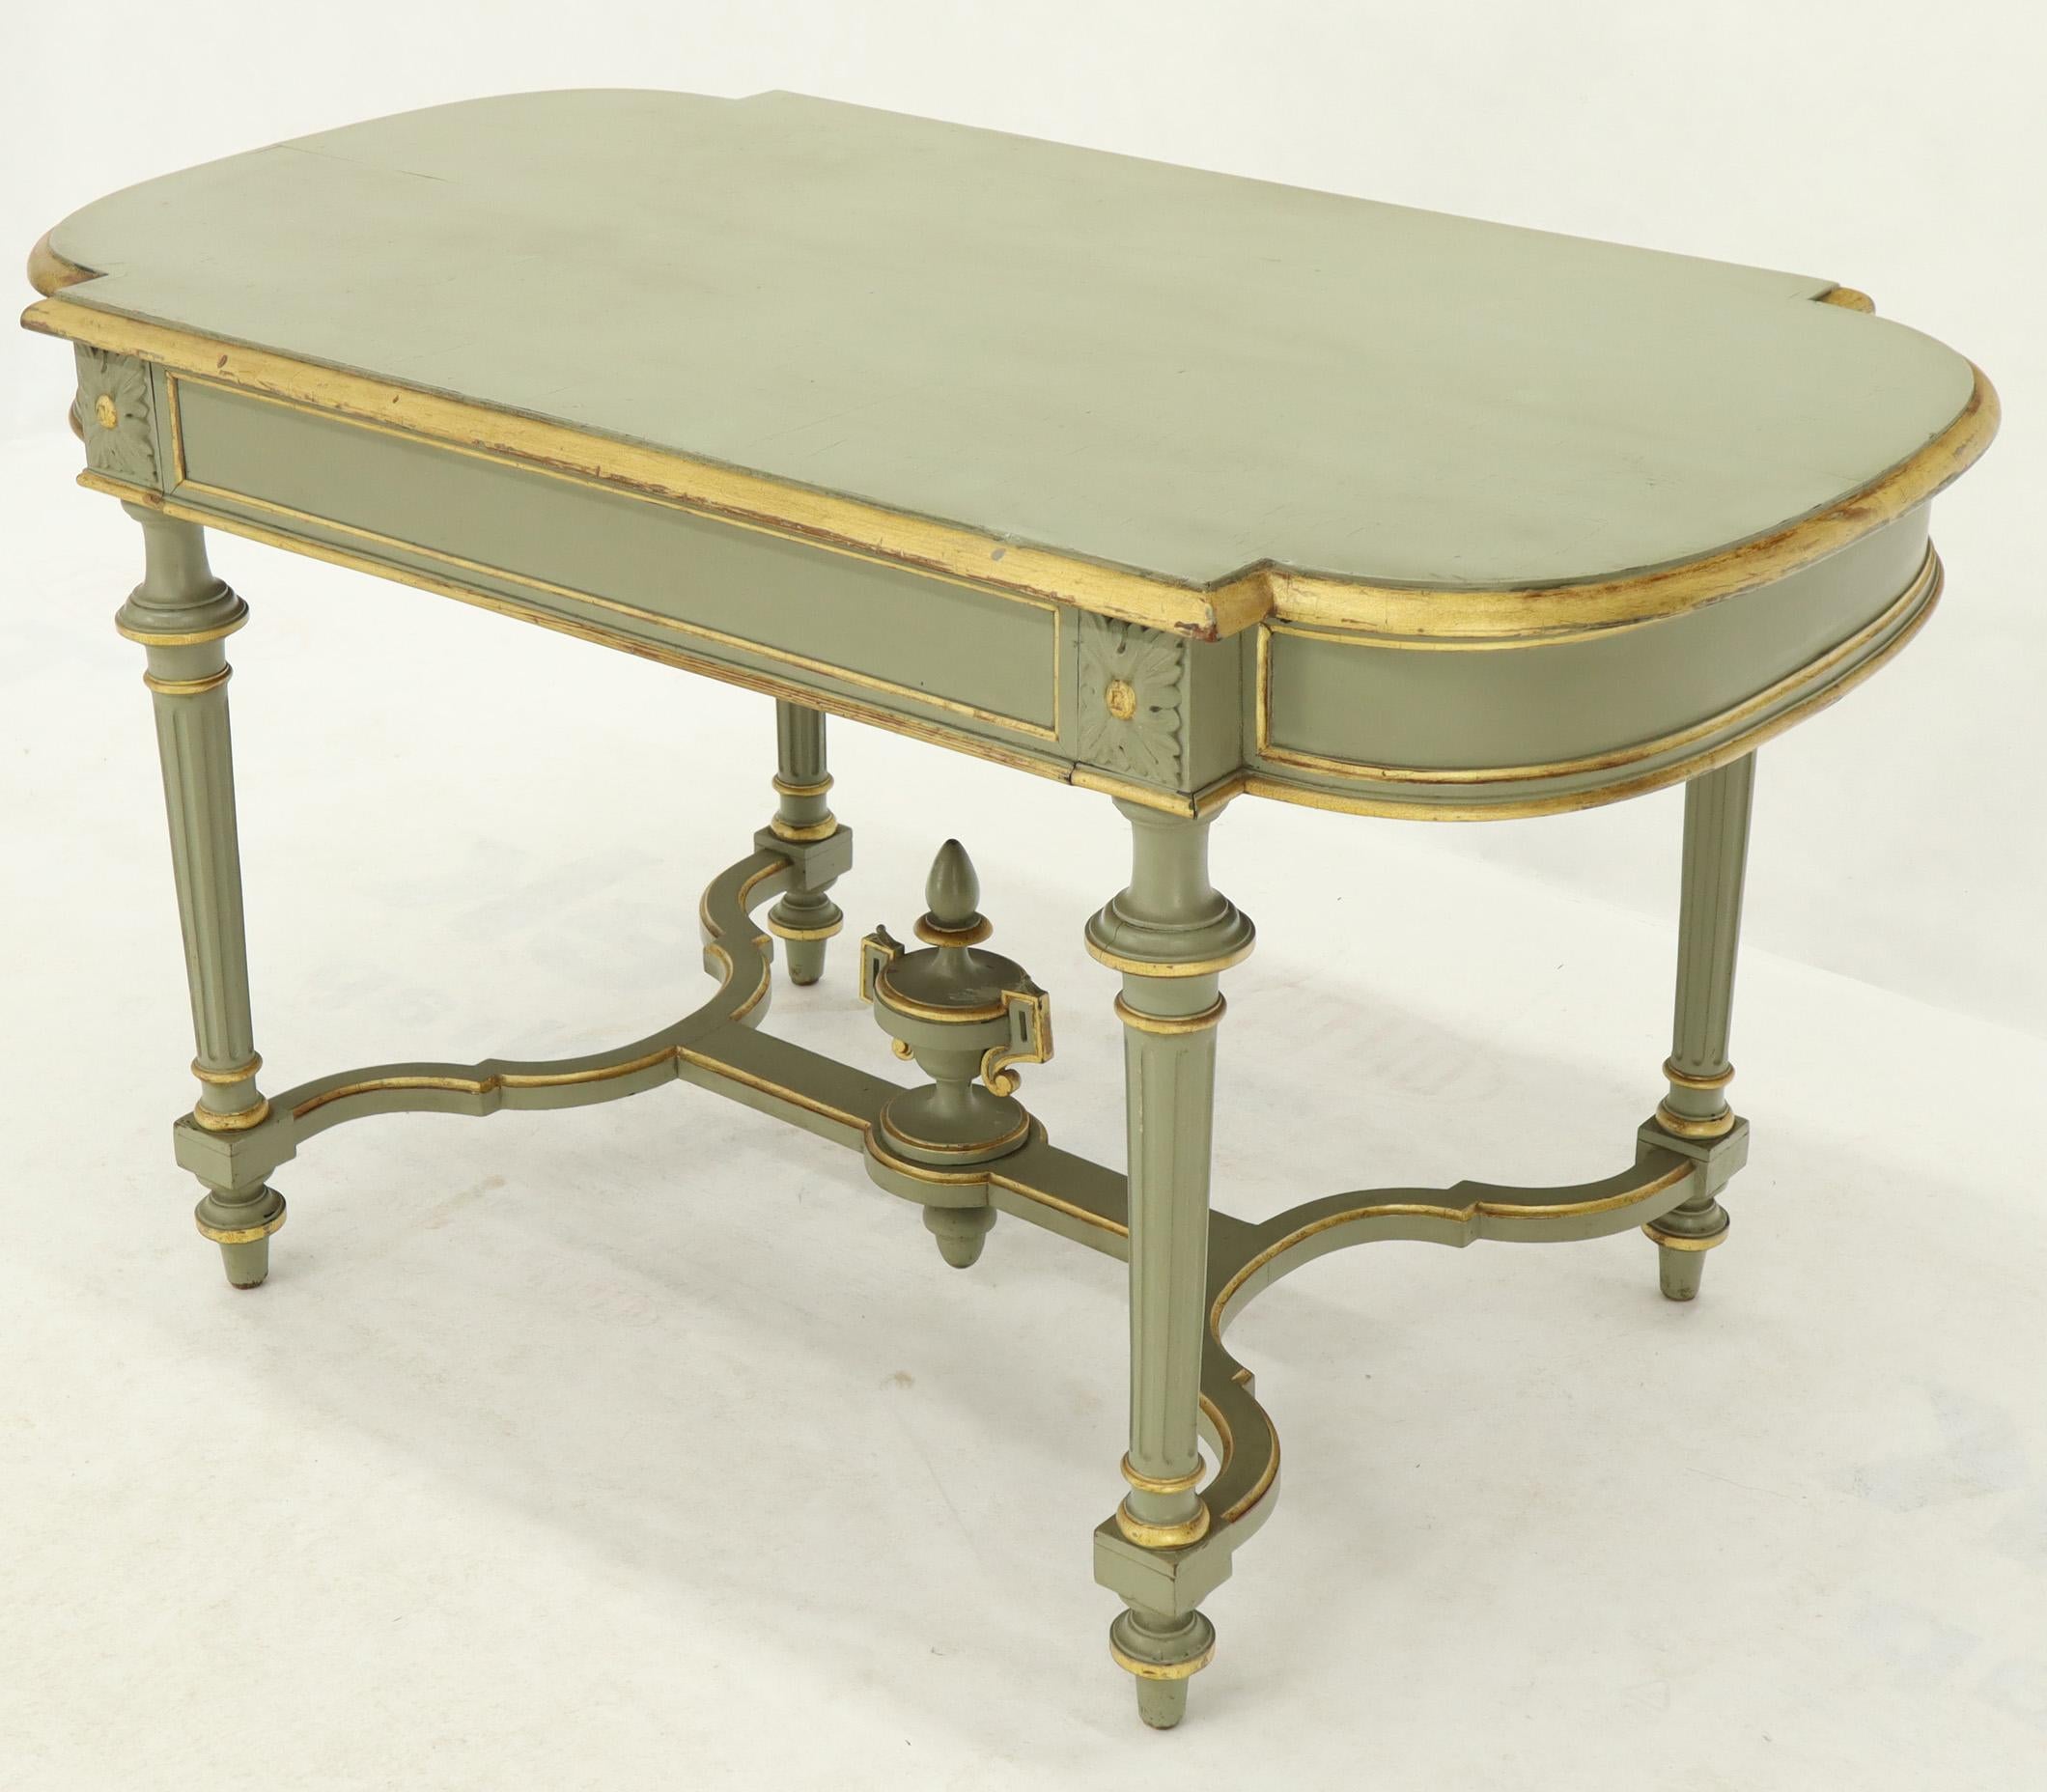 Mahogany Shabby Chic and Gold Leaf Distressed Antique Writing Table Desk Large Console For Sale